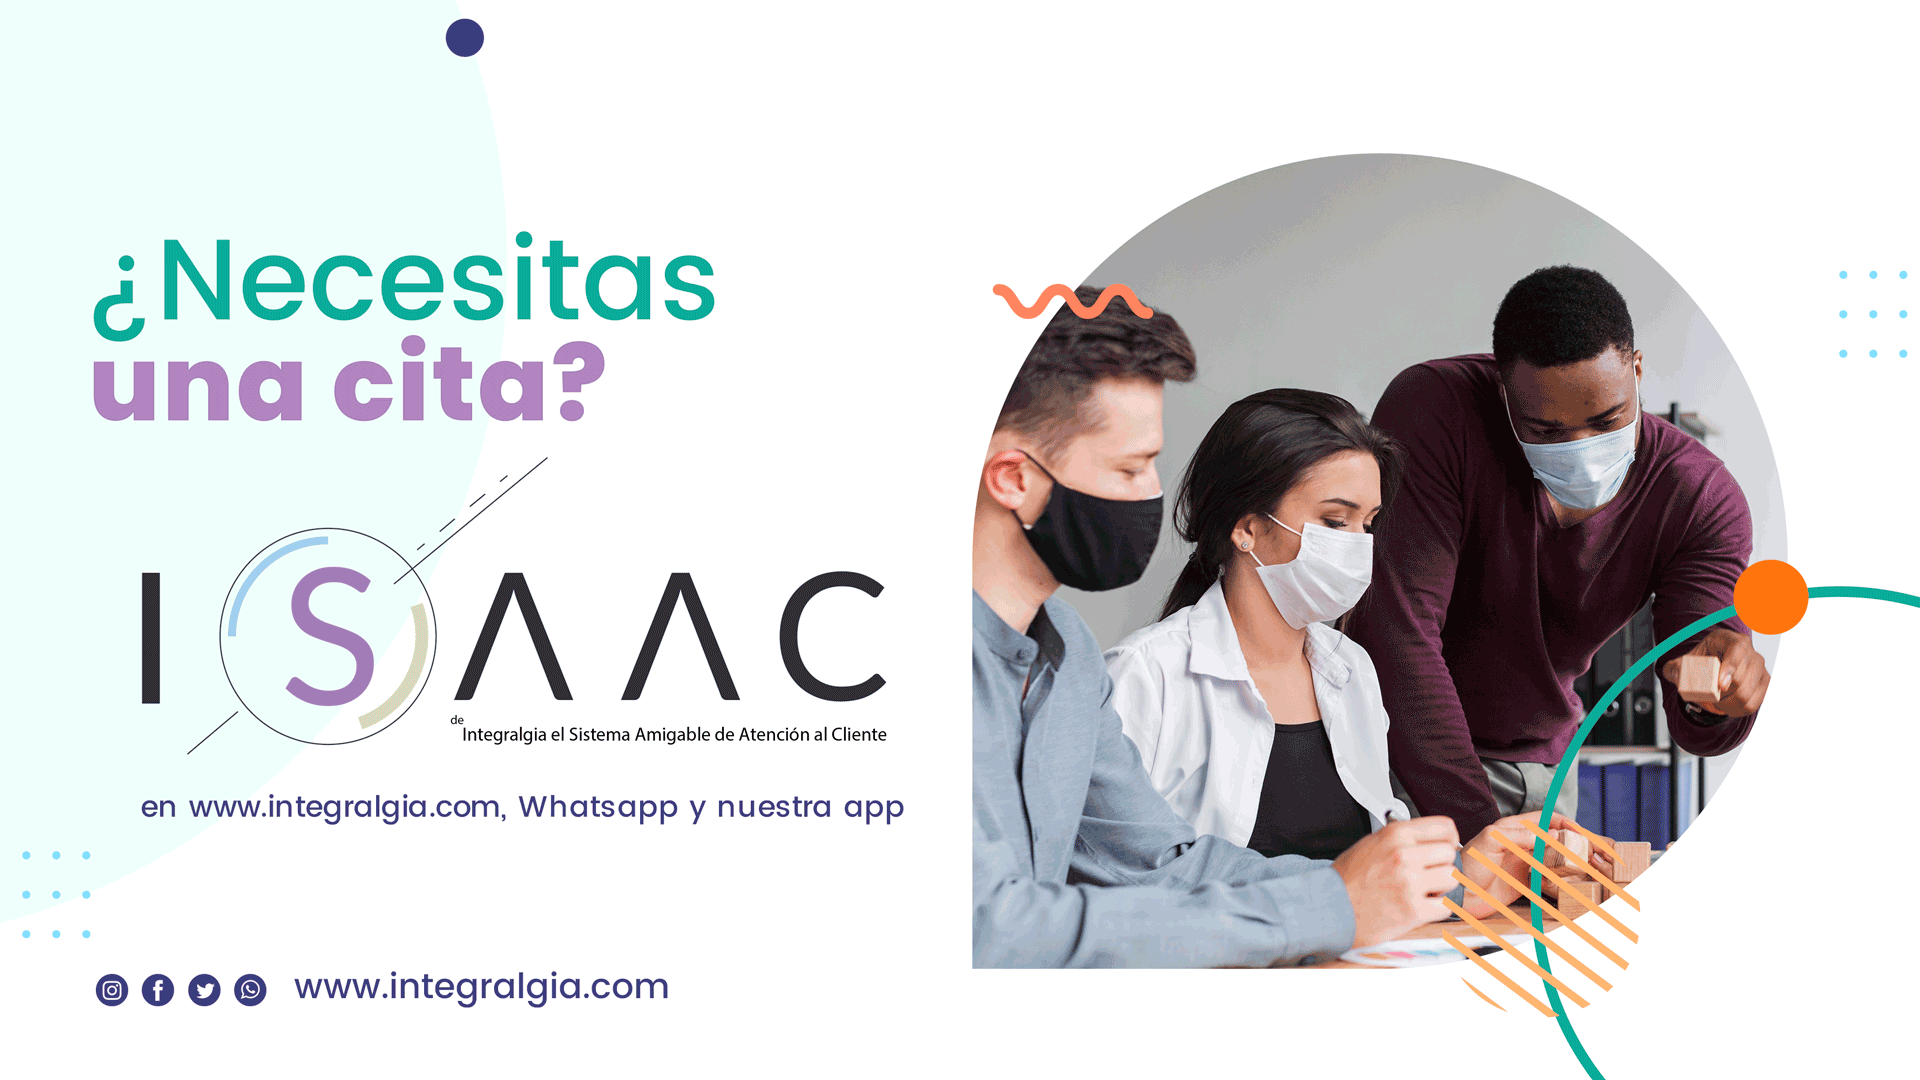 Integralgia S.A.S. Conoce ISAAC